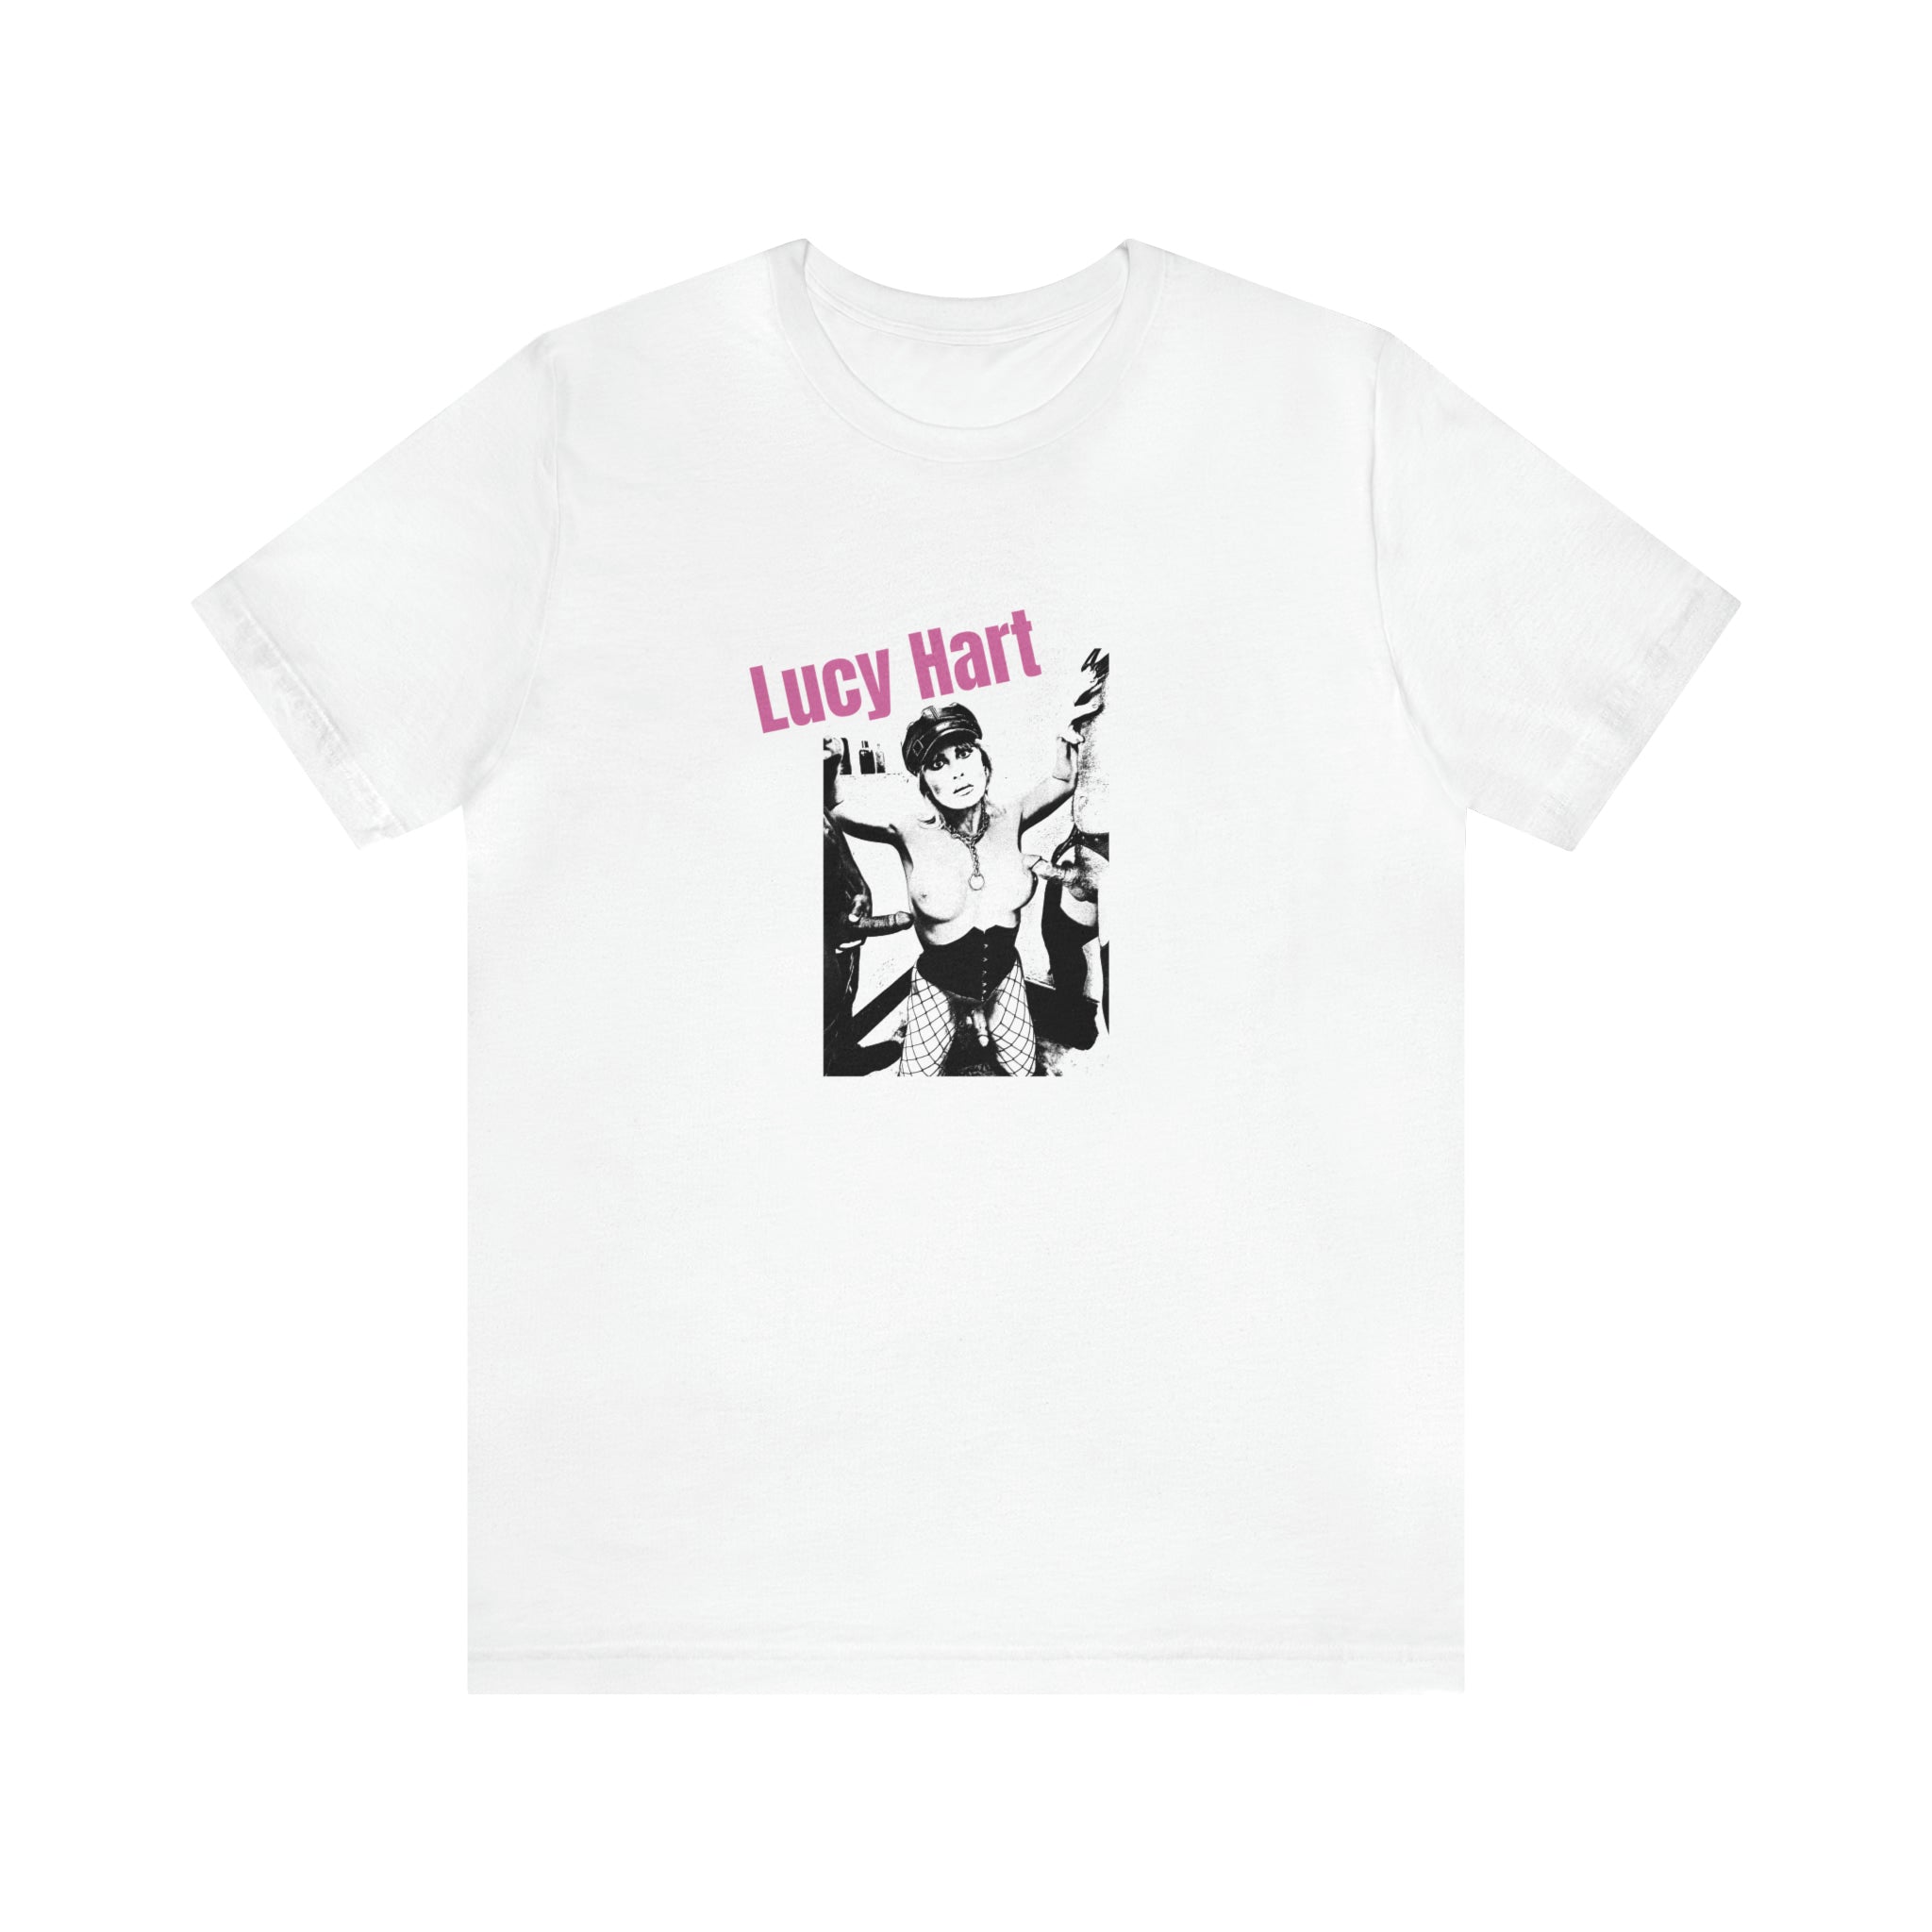 Lucy Hart Shirt w Dillon and Jake